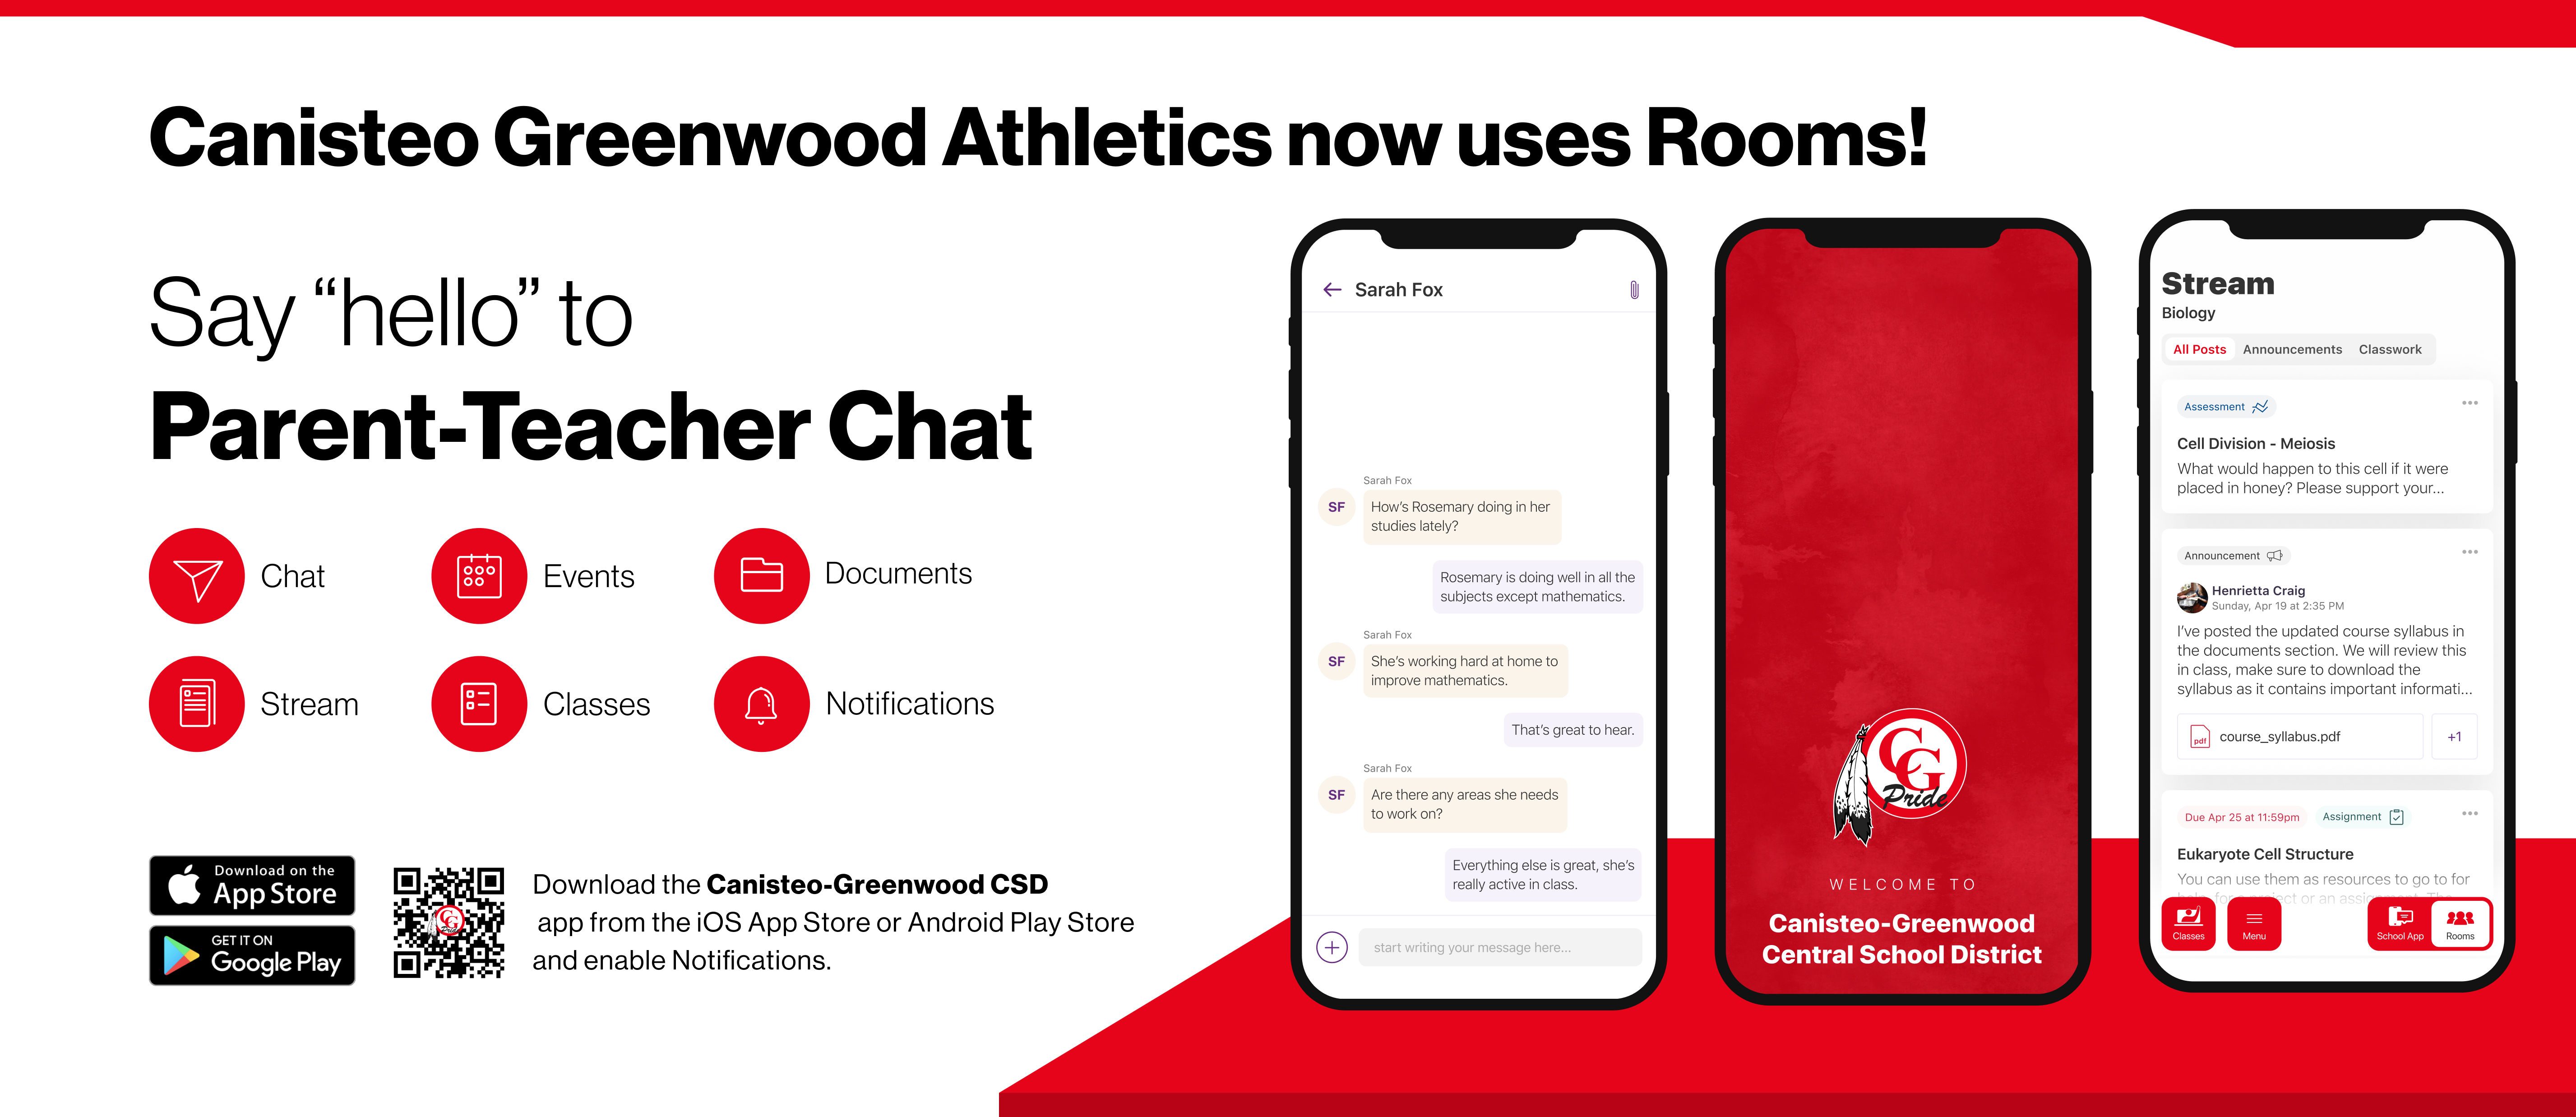 Canisteo Greenwood Athletics uses Rooms advertisement in school colors. 